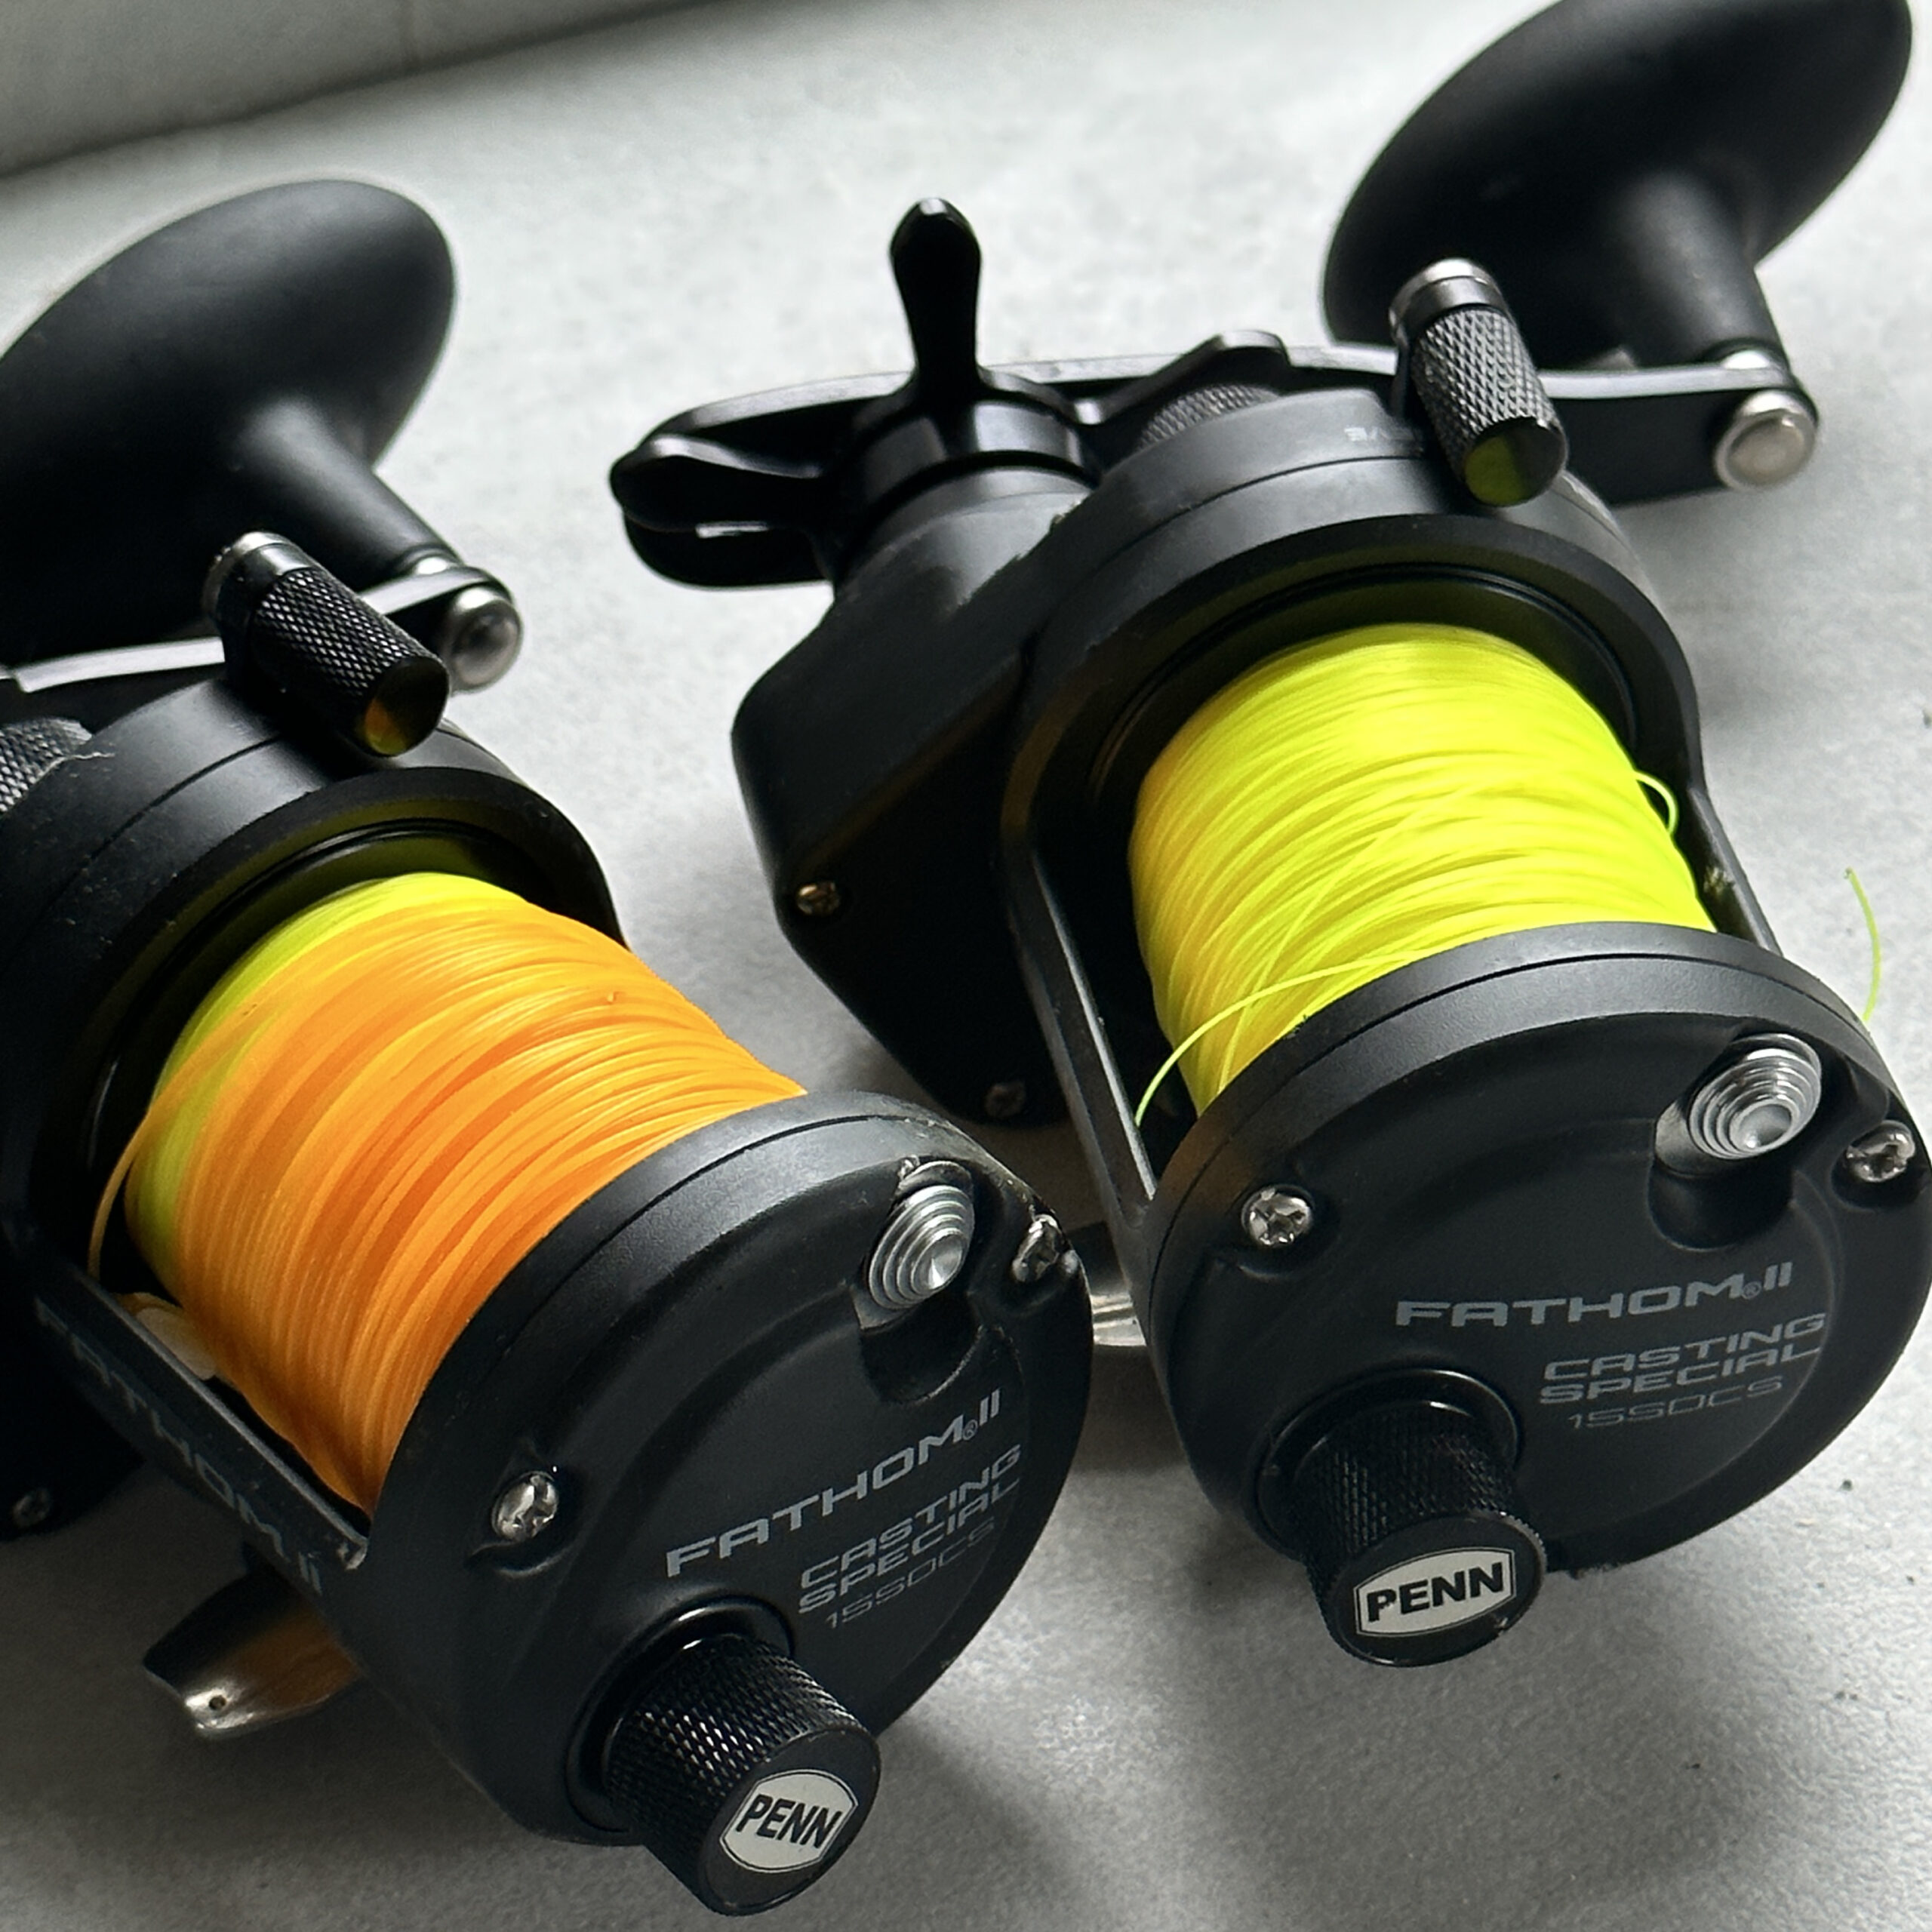 Choosing The Best Multiplier Reel For Your Shore Fishing - Veals